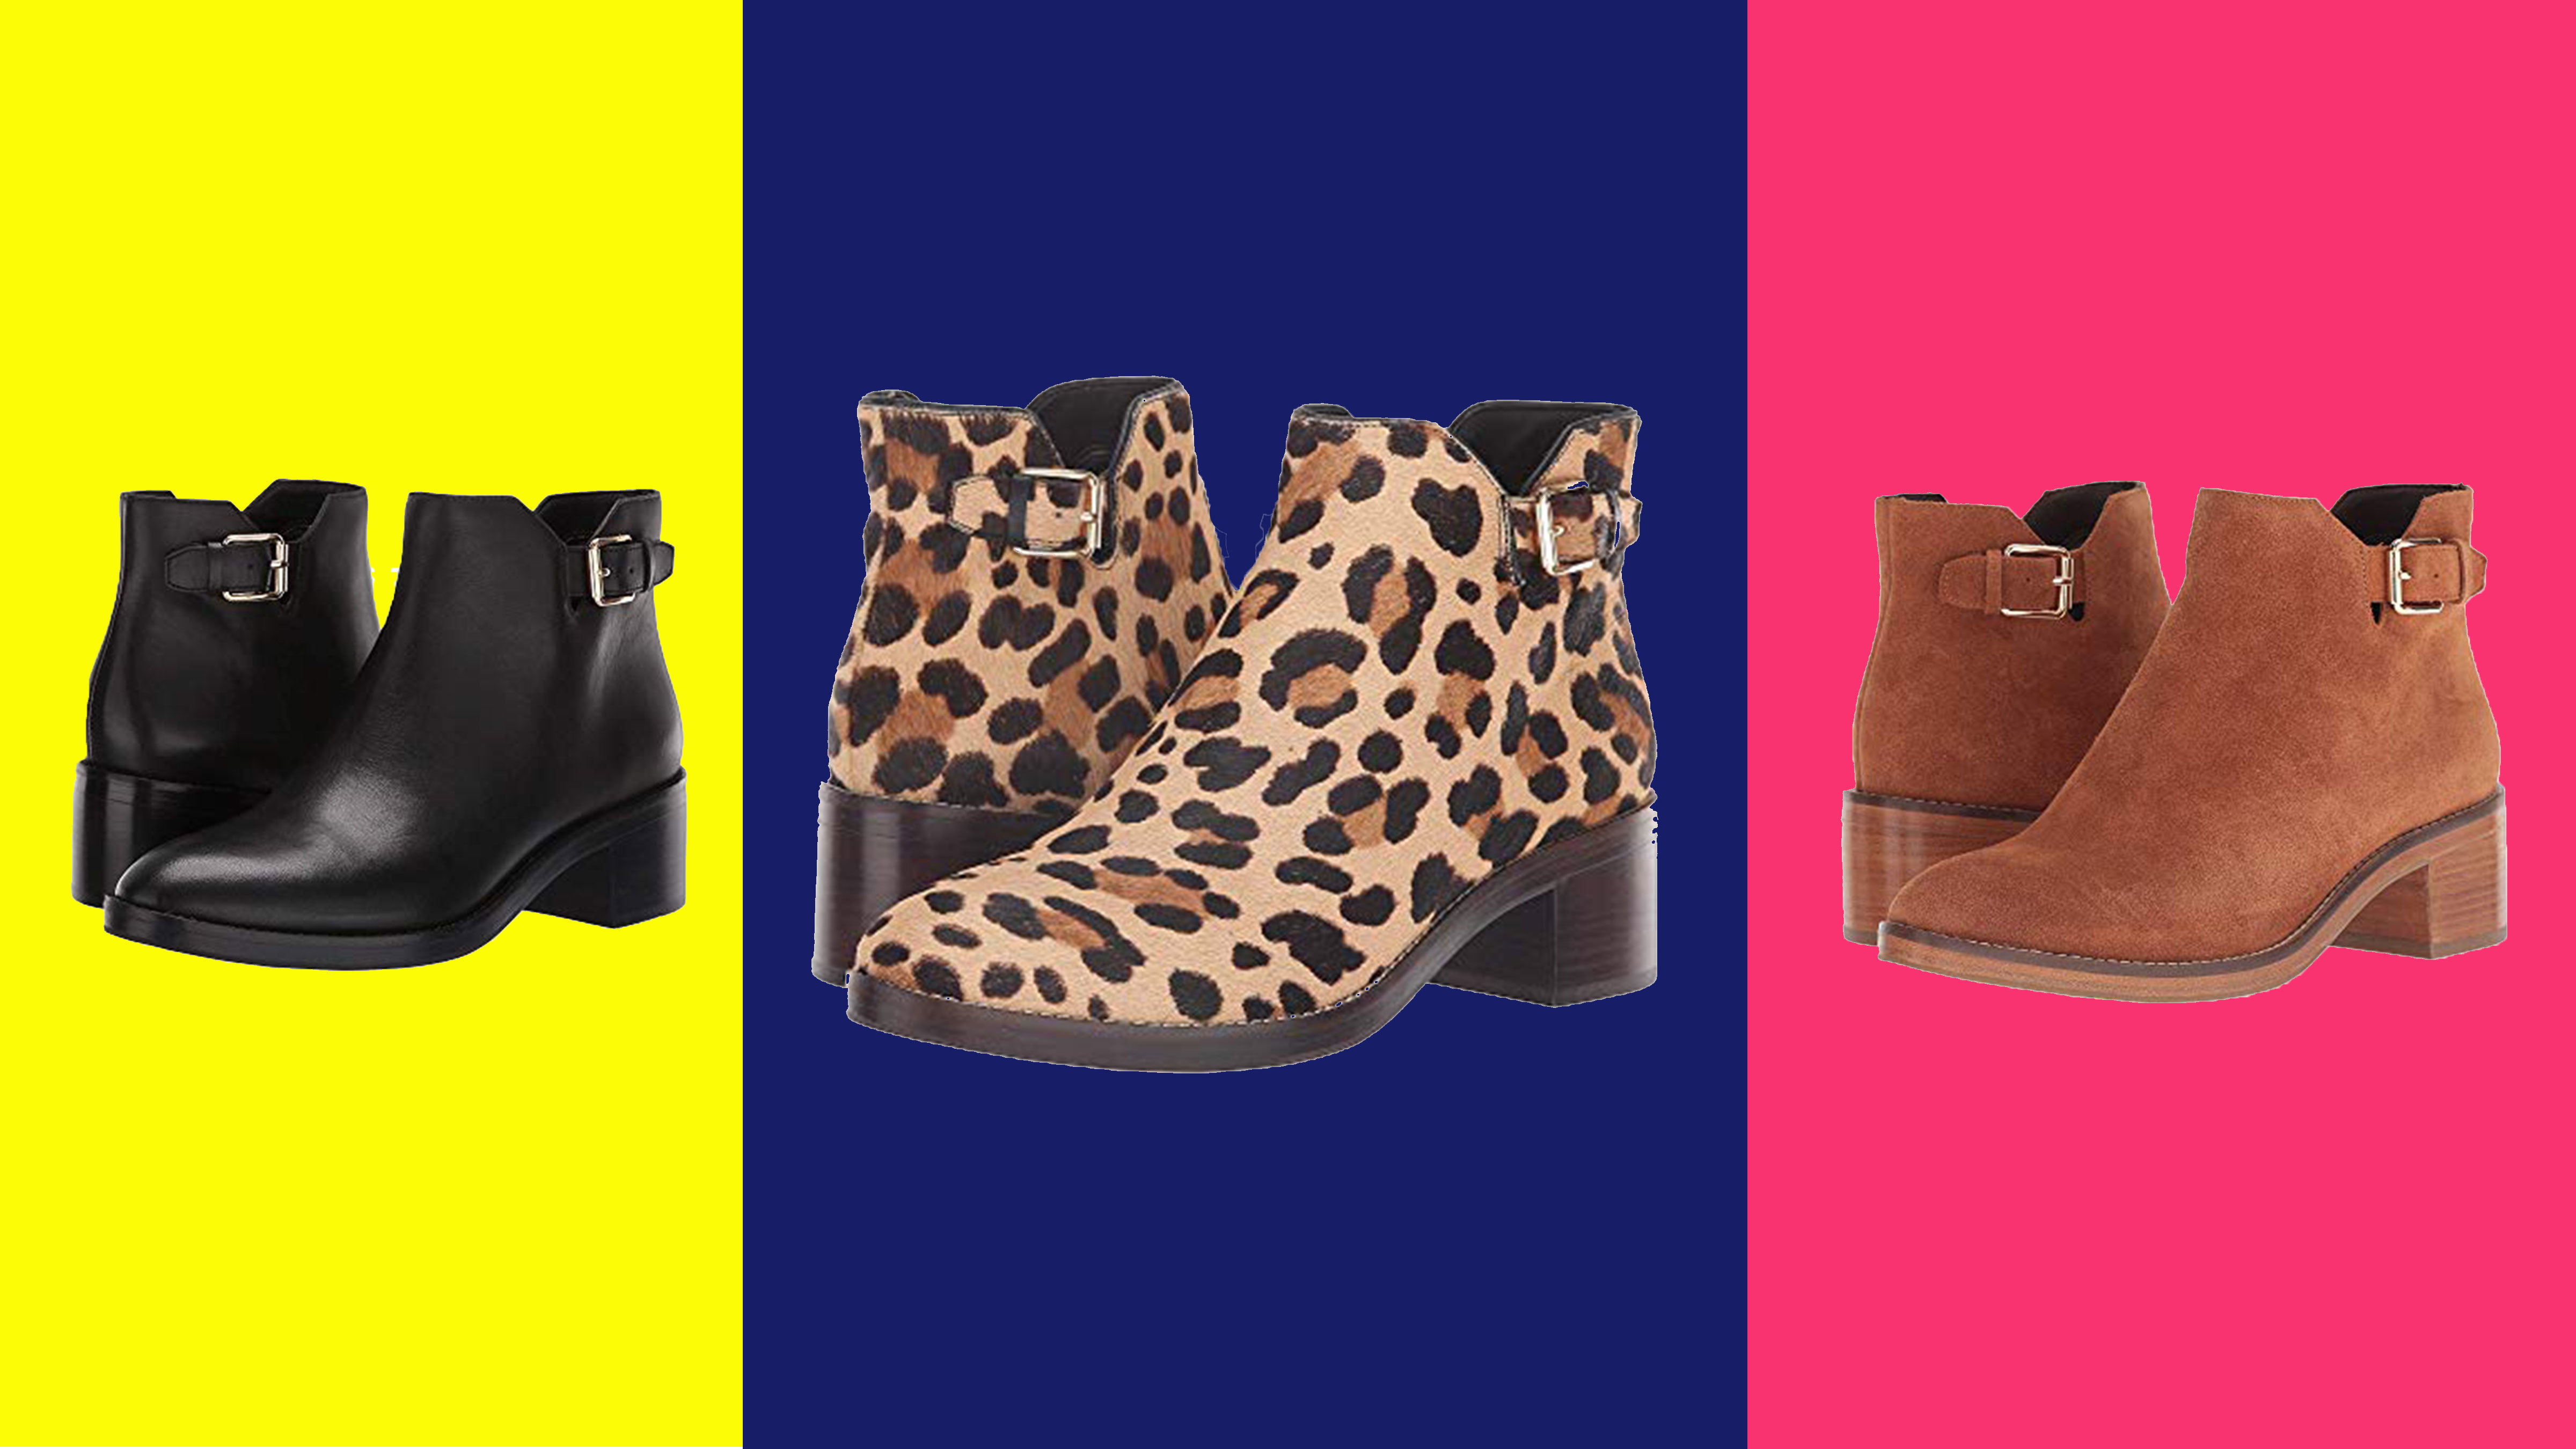 cole haan leopard ankle boots